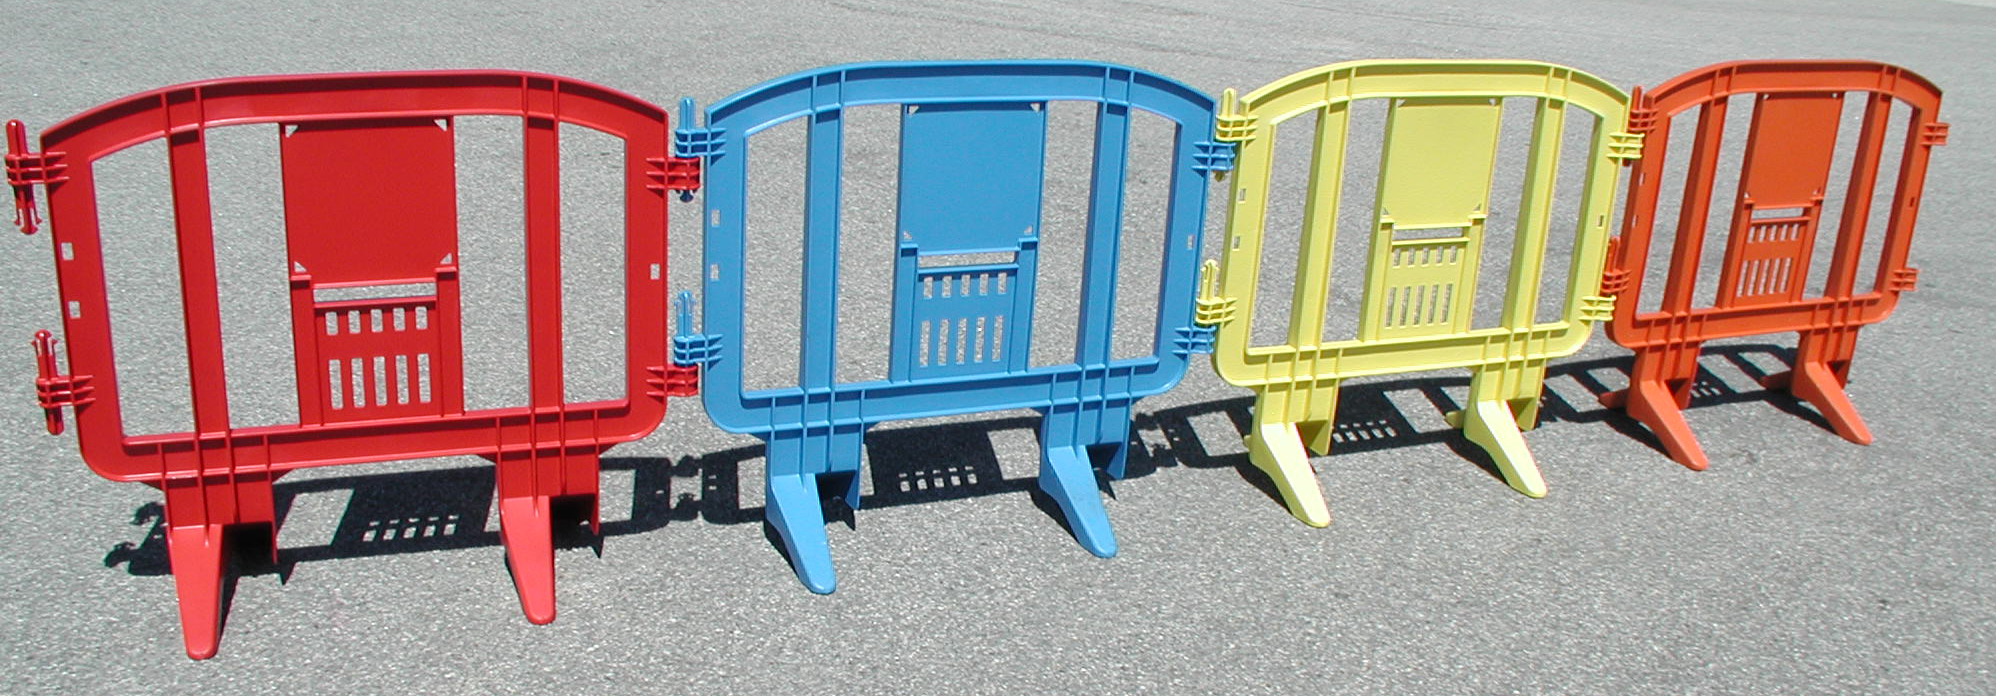 Minit Plastic Barriers for Crowd Control